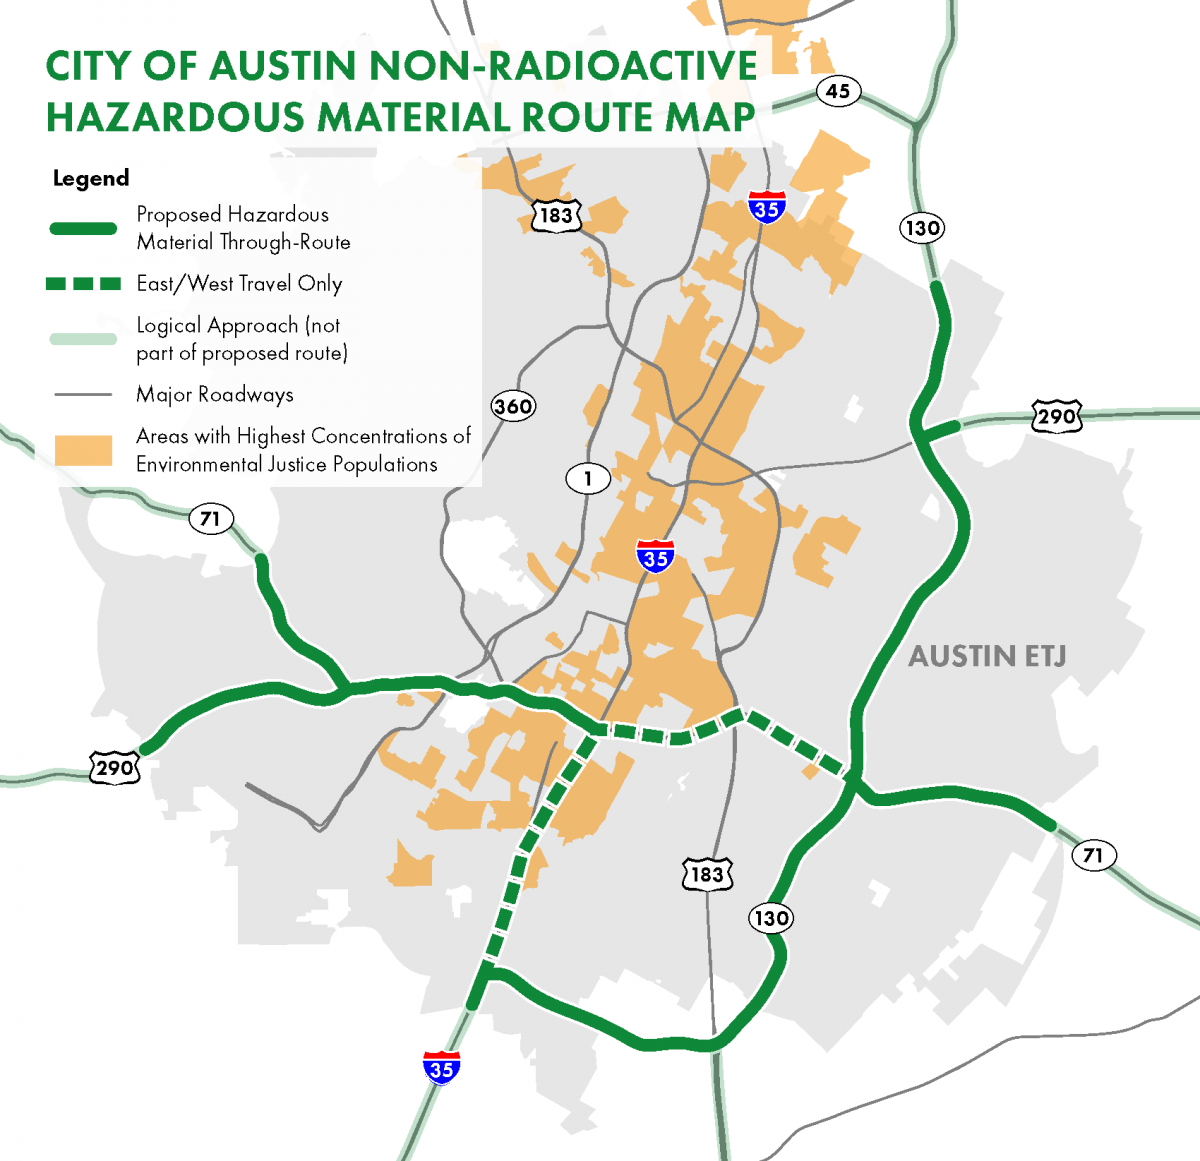 Map of the proposed route for non-radioactive hazardous materials for Austin with an overlay that shows high concentrations of environmental justice populations.